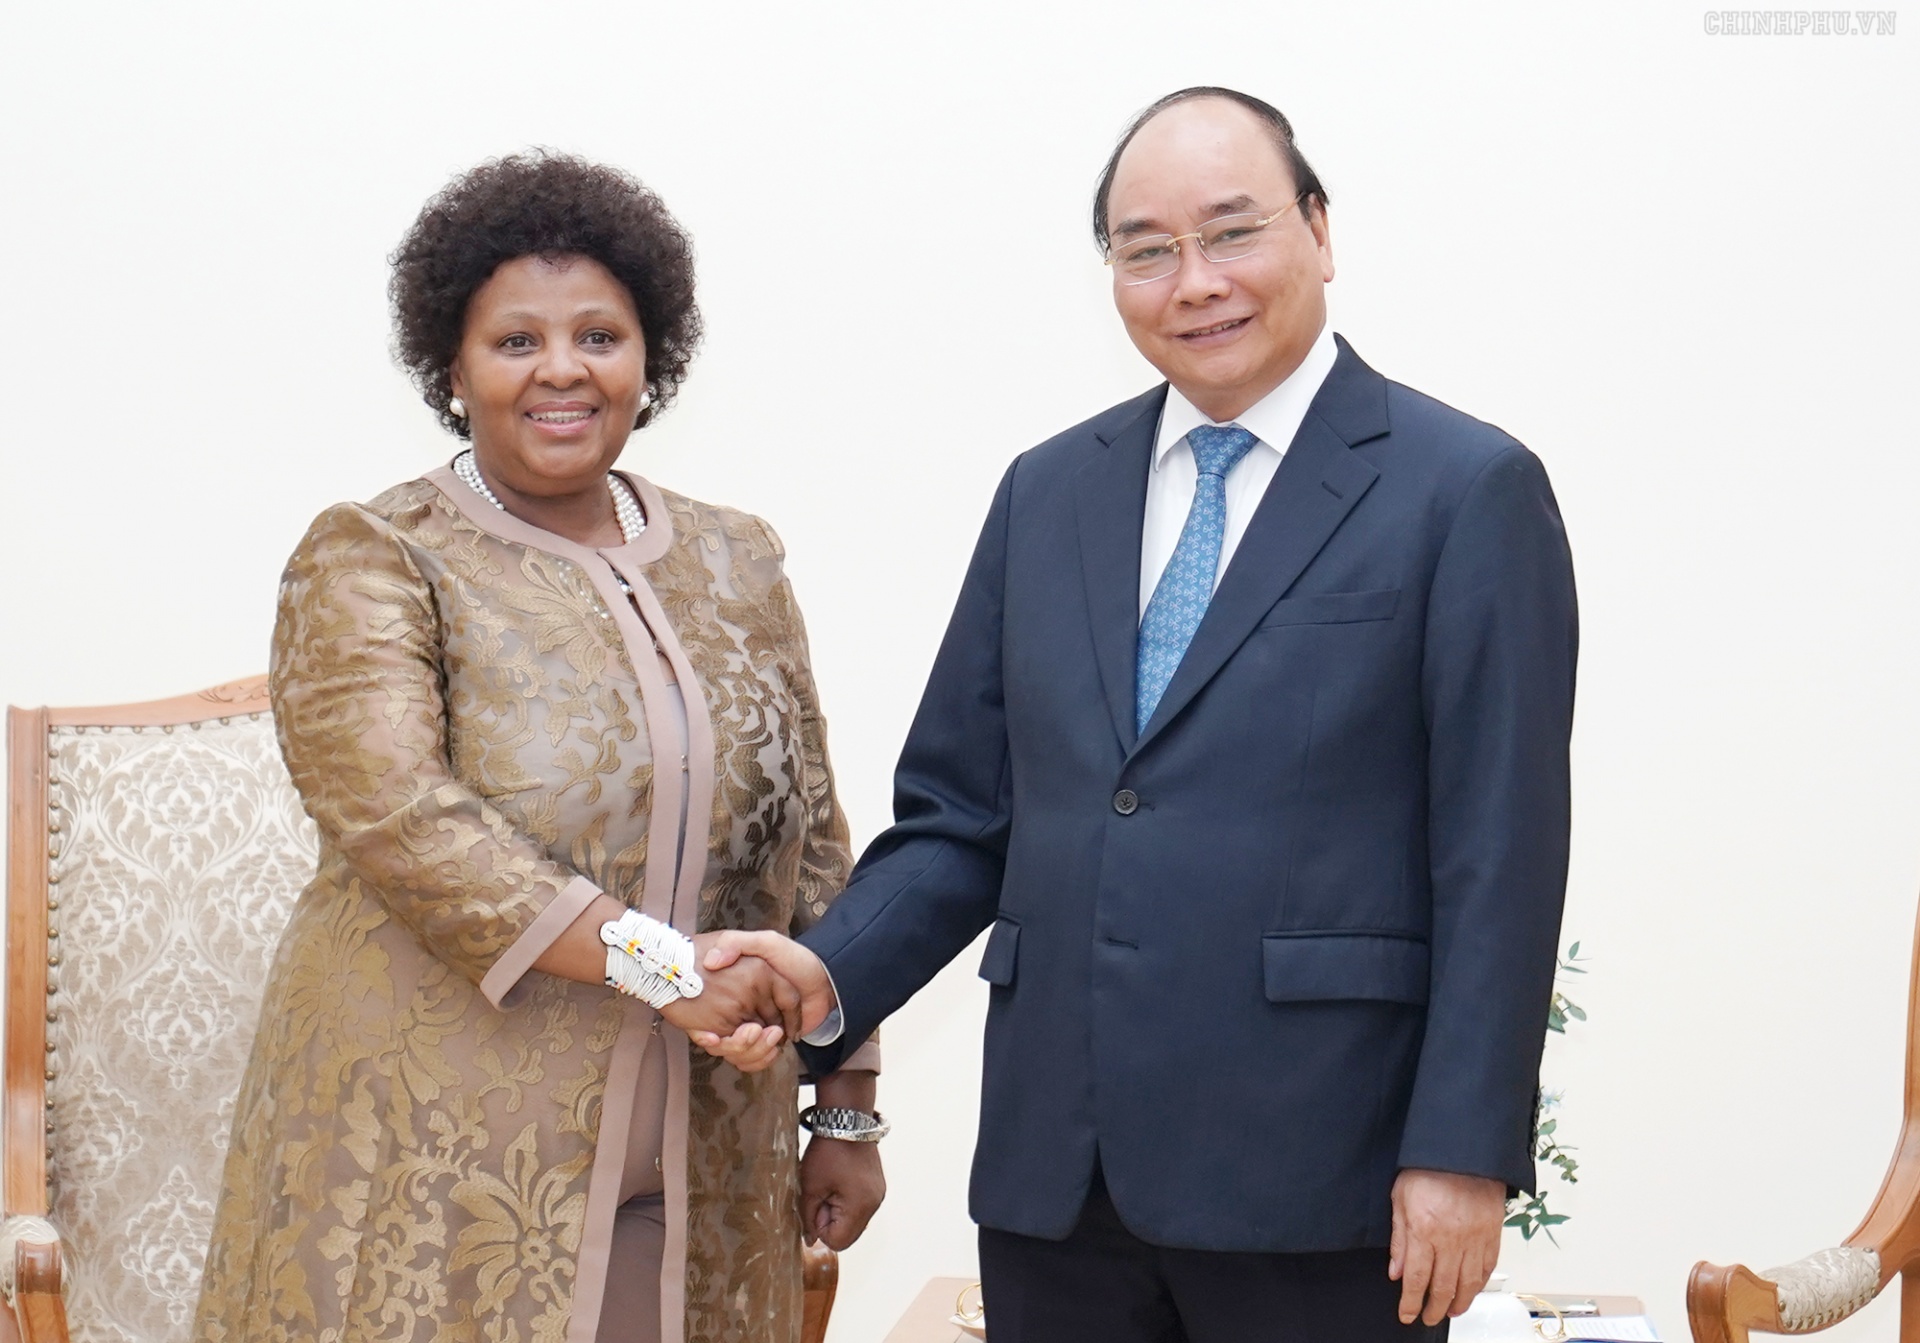 pm vietnam treasures relations with south africa